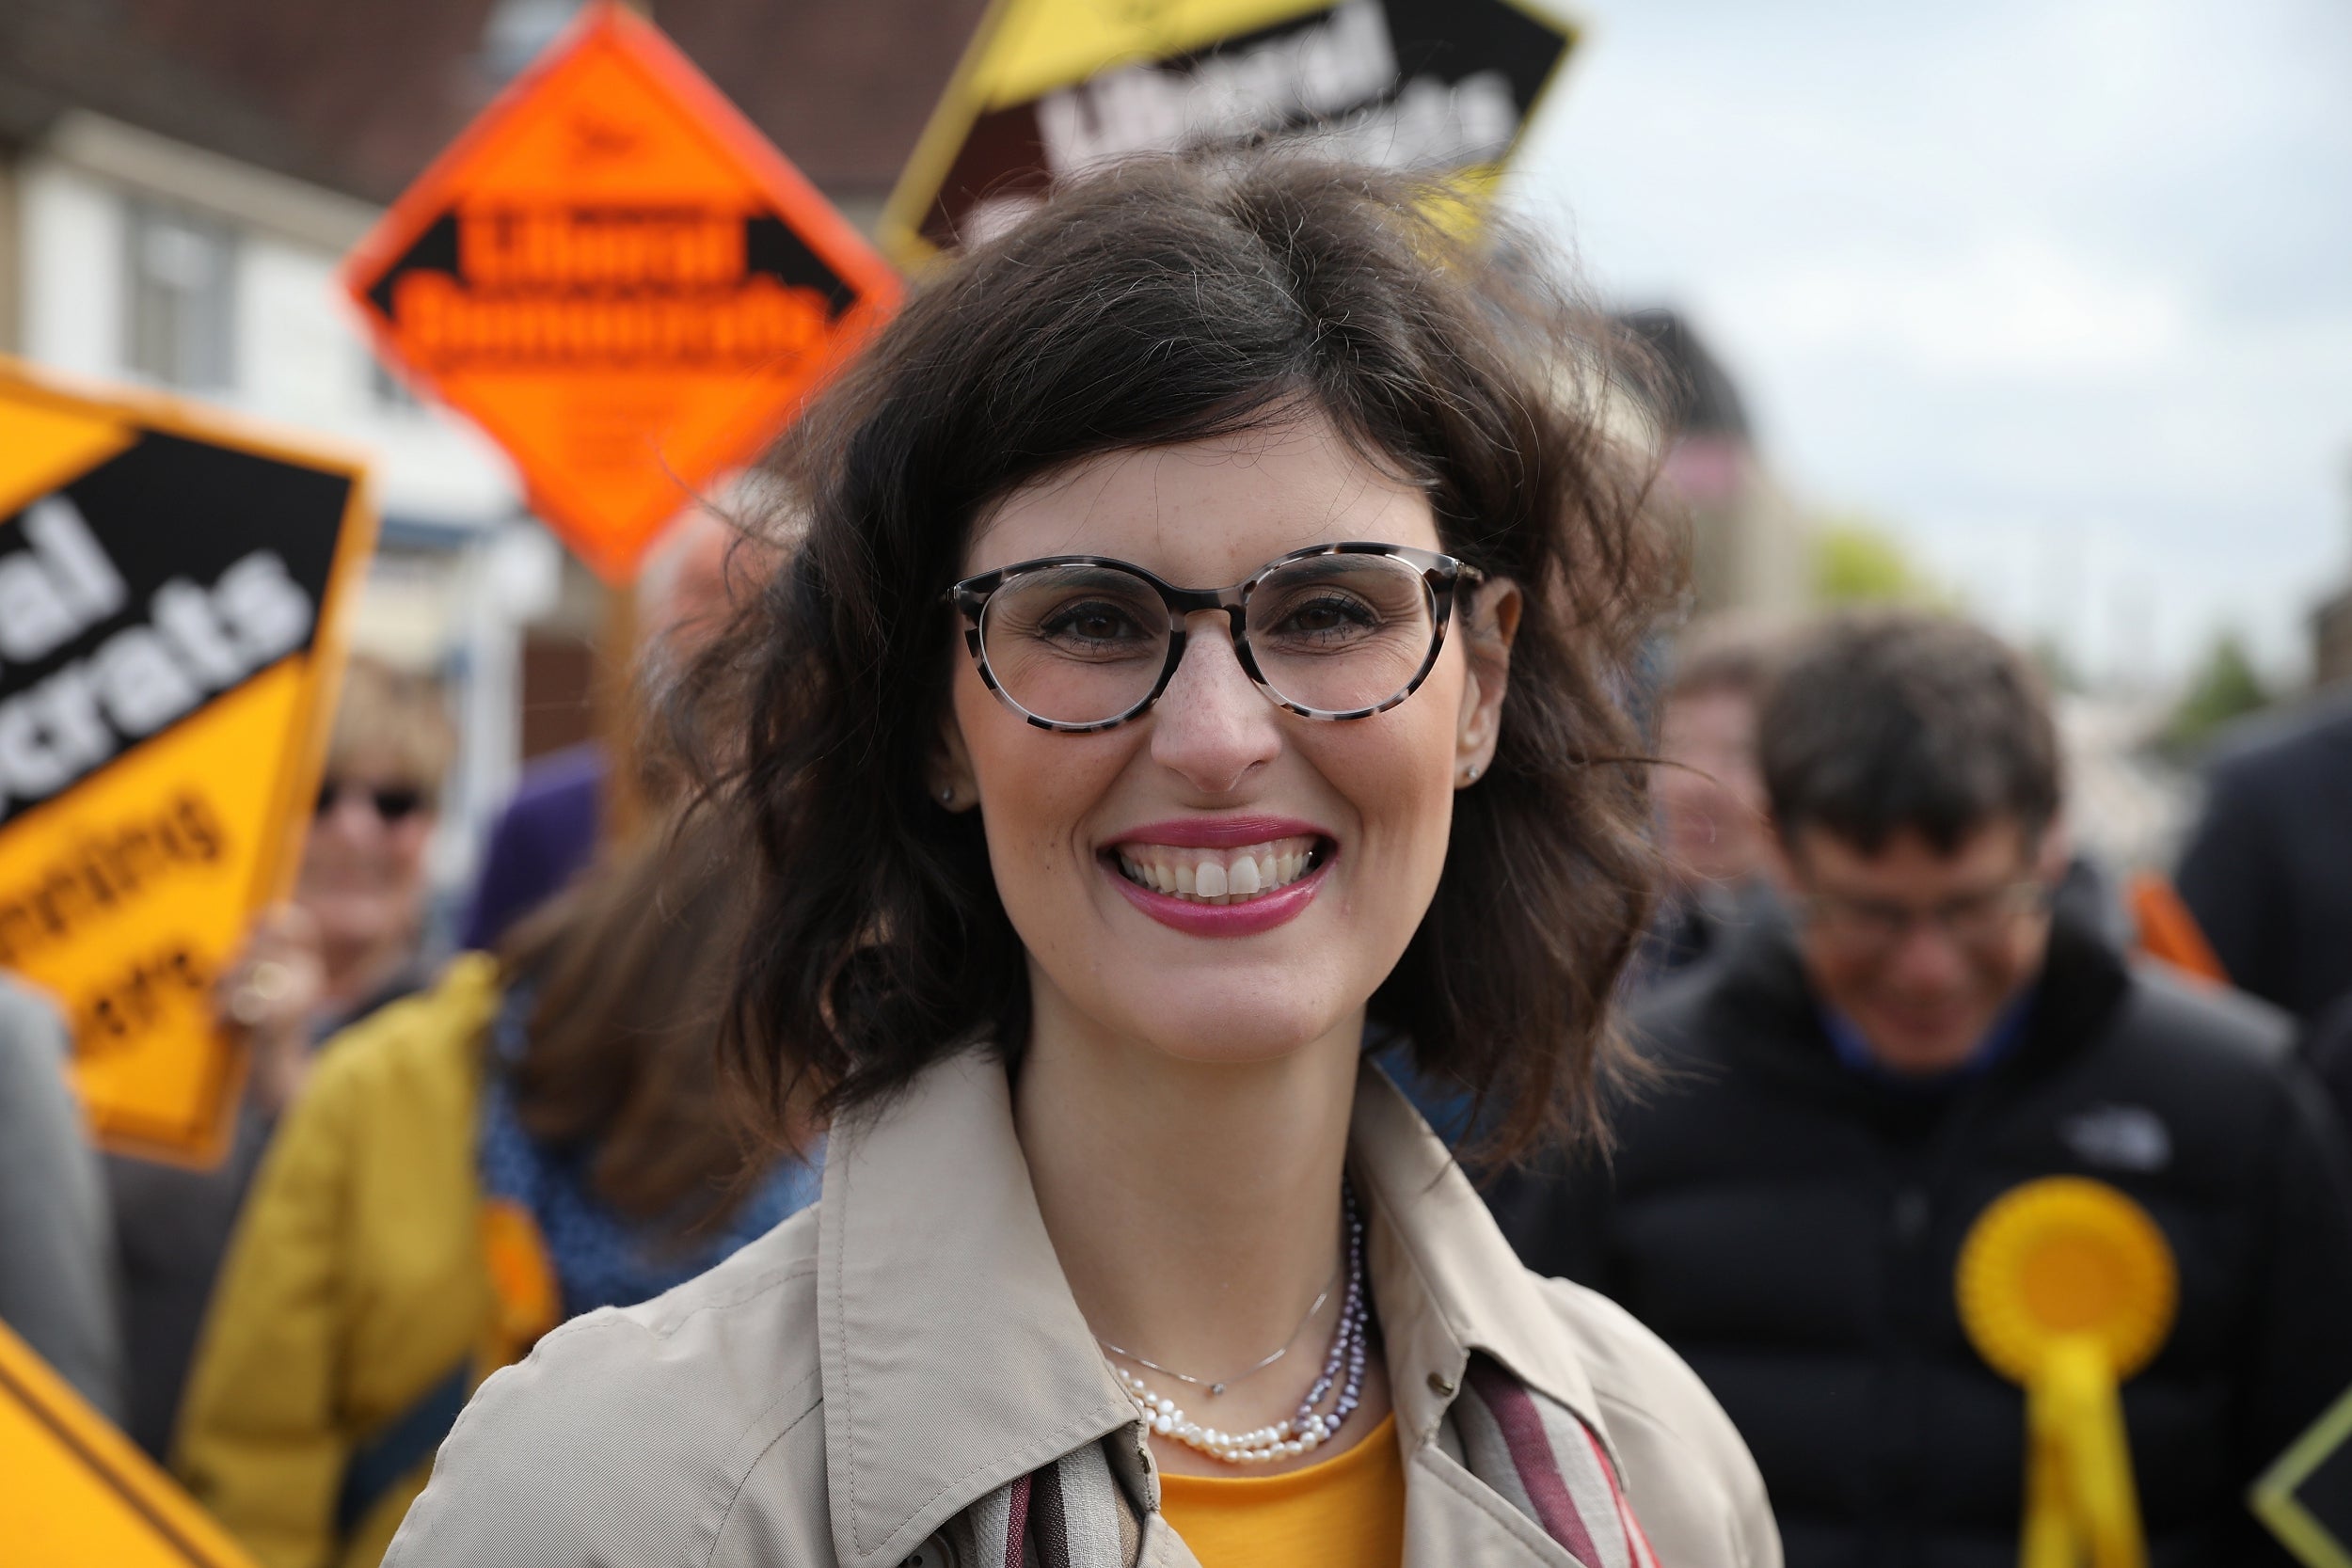 This year, conference will hear from up-and-coming MP for Oxford West and Abingdon, Layla Moran